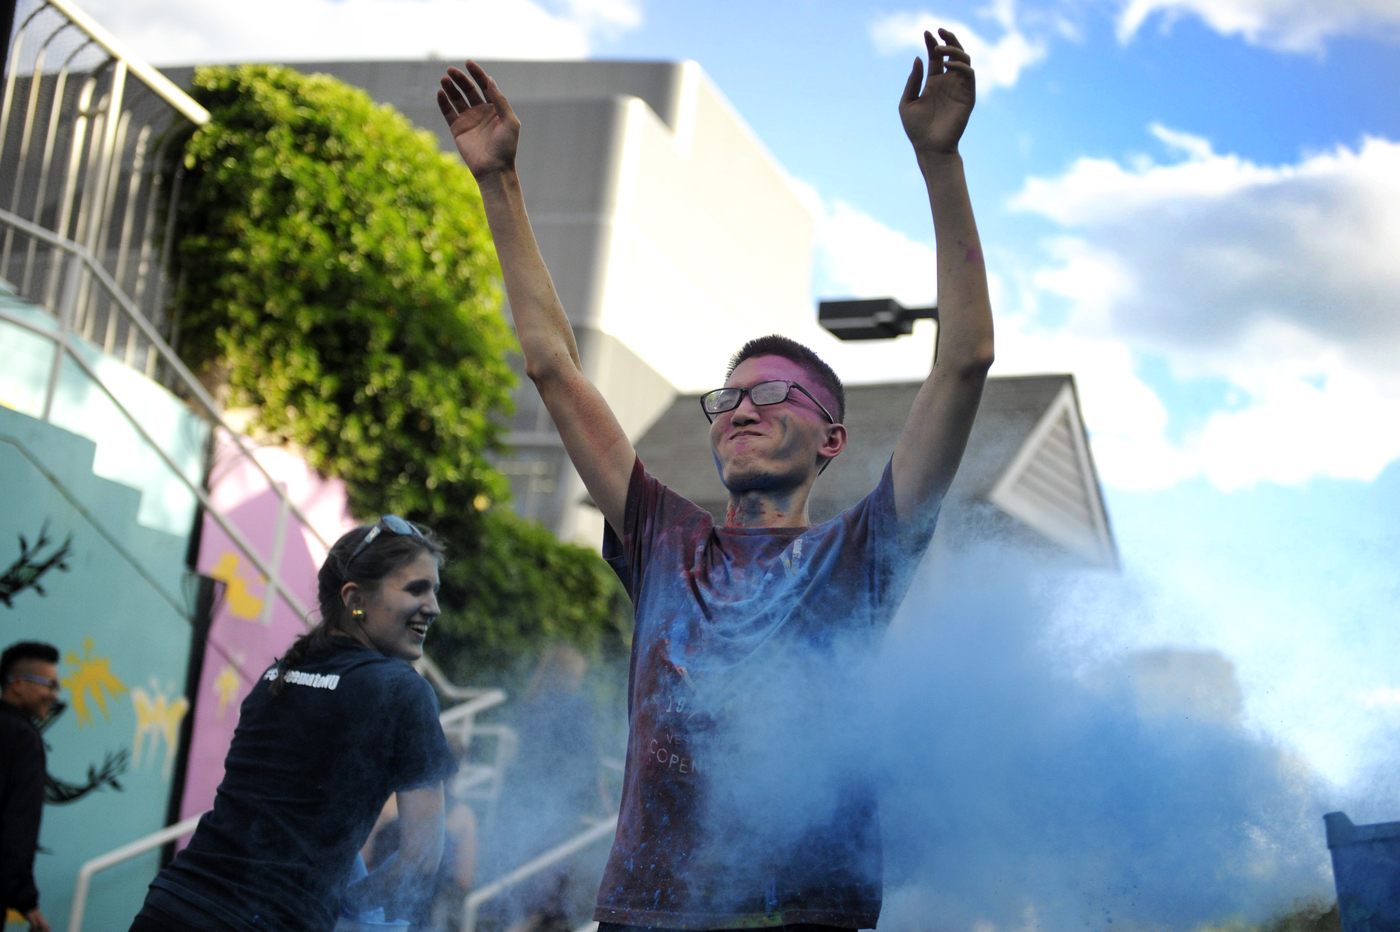 Scenes during the 5k Color Run sponsored by NUterm and CSI held at Northeastern University on June 22, 2016. Photo by Matthew Modoono/Northeastern University